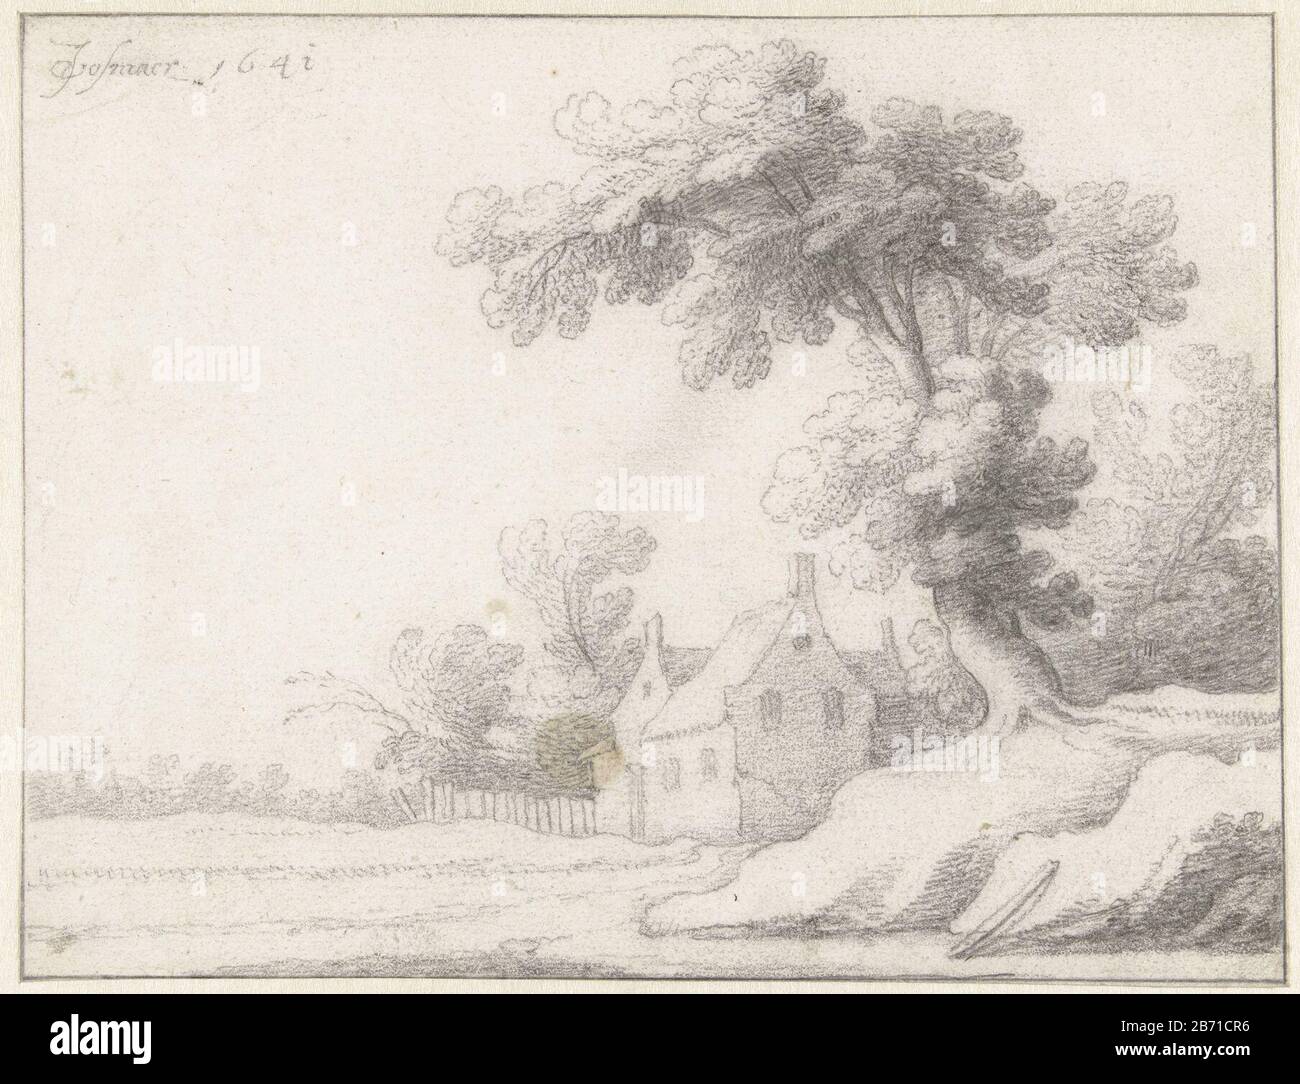 Landschap met een groep huizen aan een bosrand Landscape with a group of houses on the edge Object type: Drawing Object number: RP-T 1941-49 Manufacturer : artist: Jacob Vosmaer Date: 1641 Physical features: black chalk material: paper chalk Dimensions: H 176 mm × W 230 mm Subject: farm or solitary house in landscape and Stock Photo